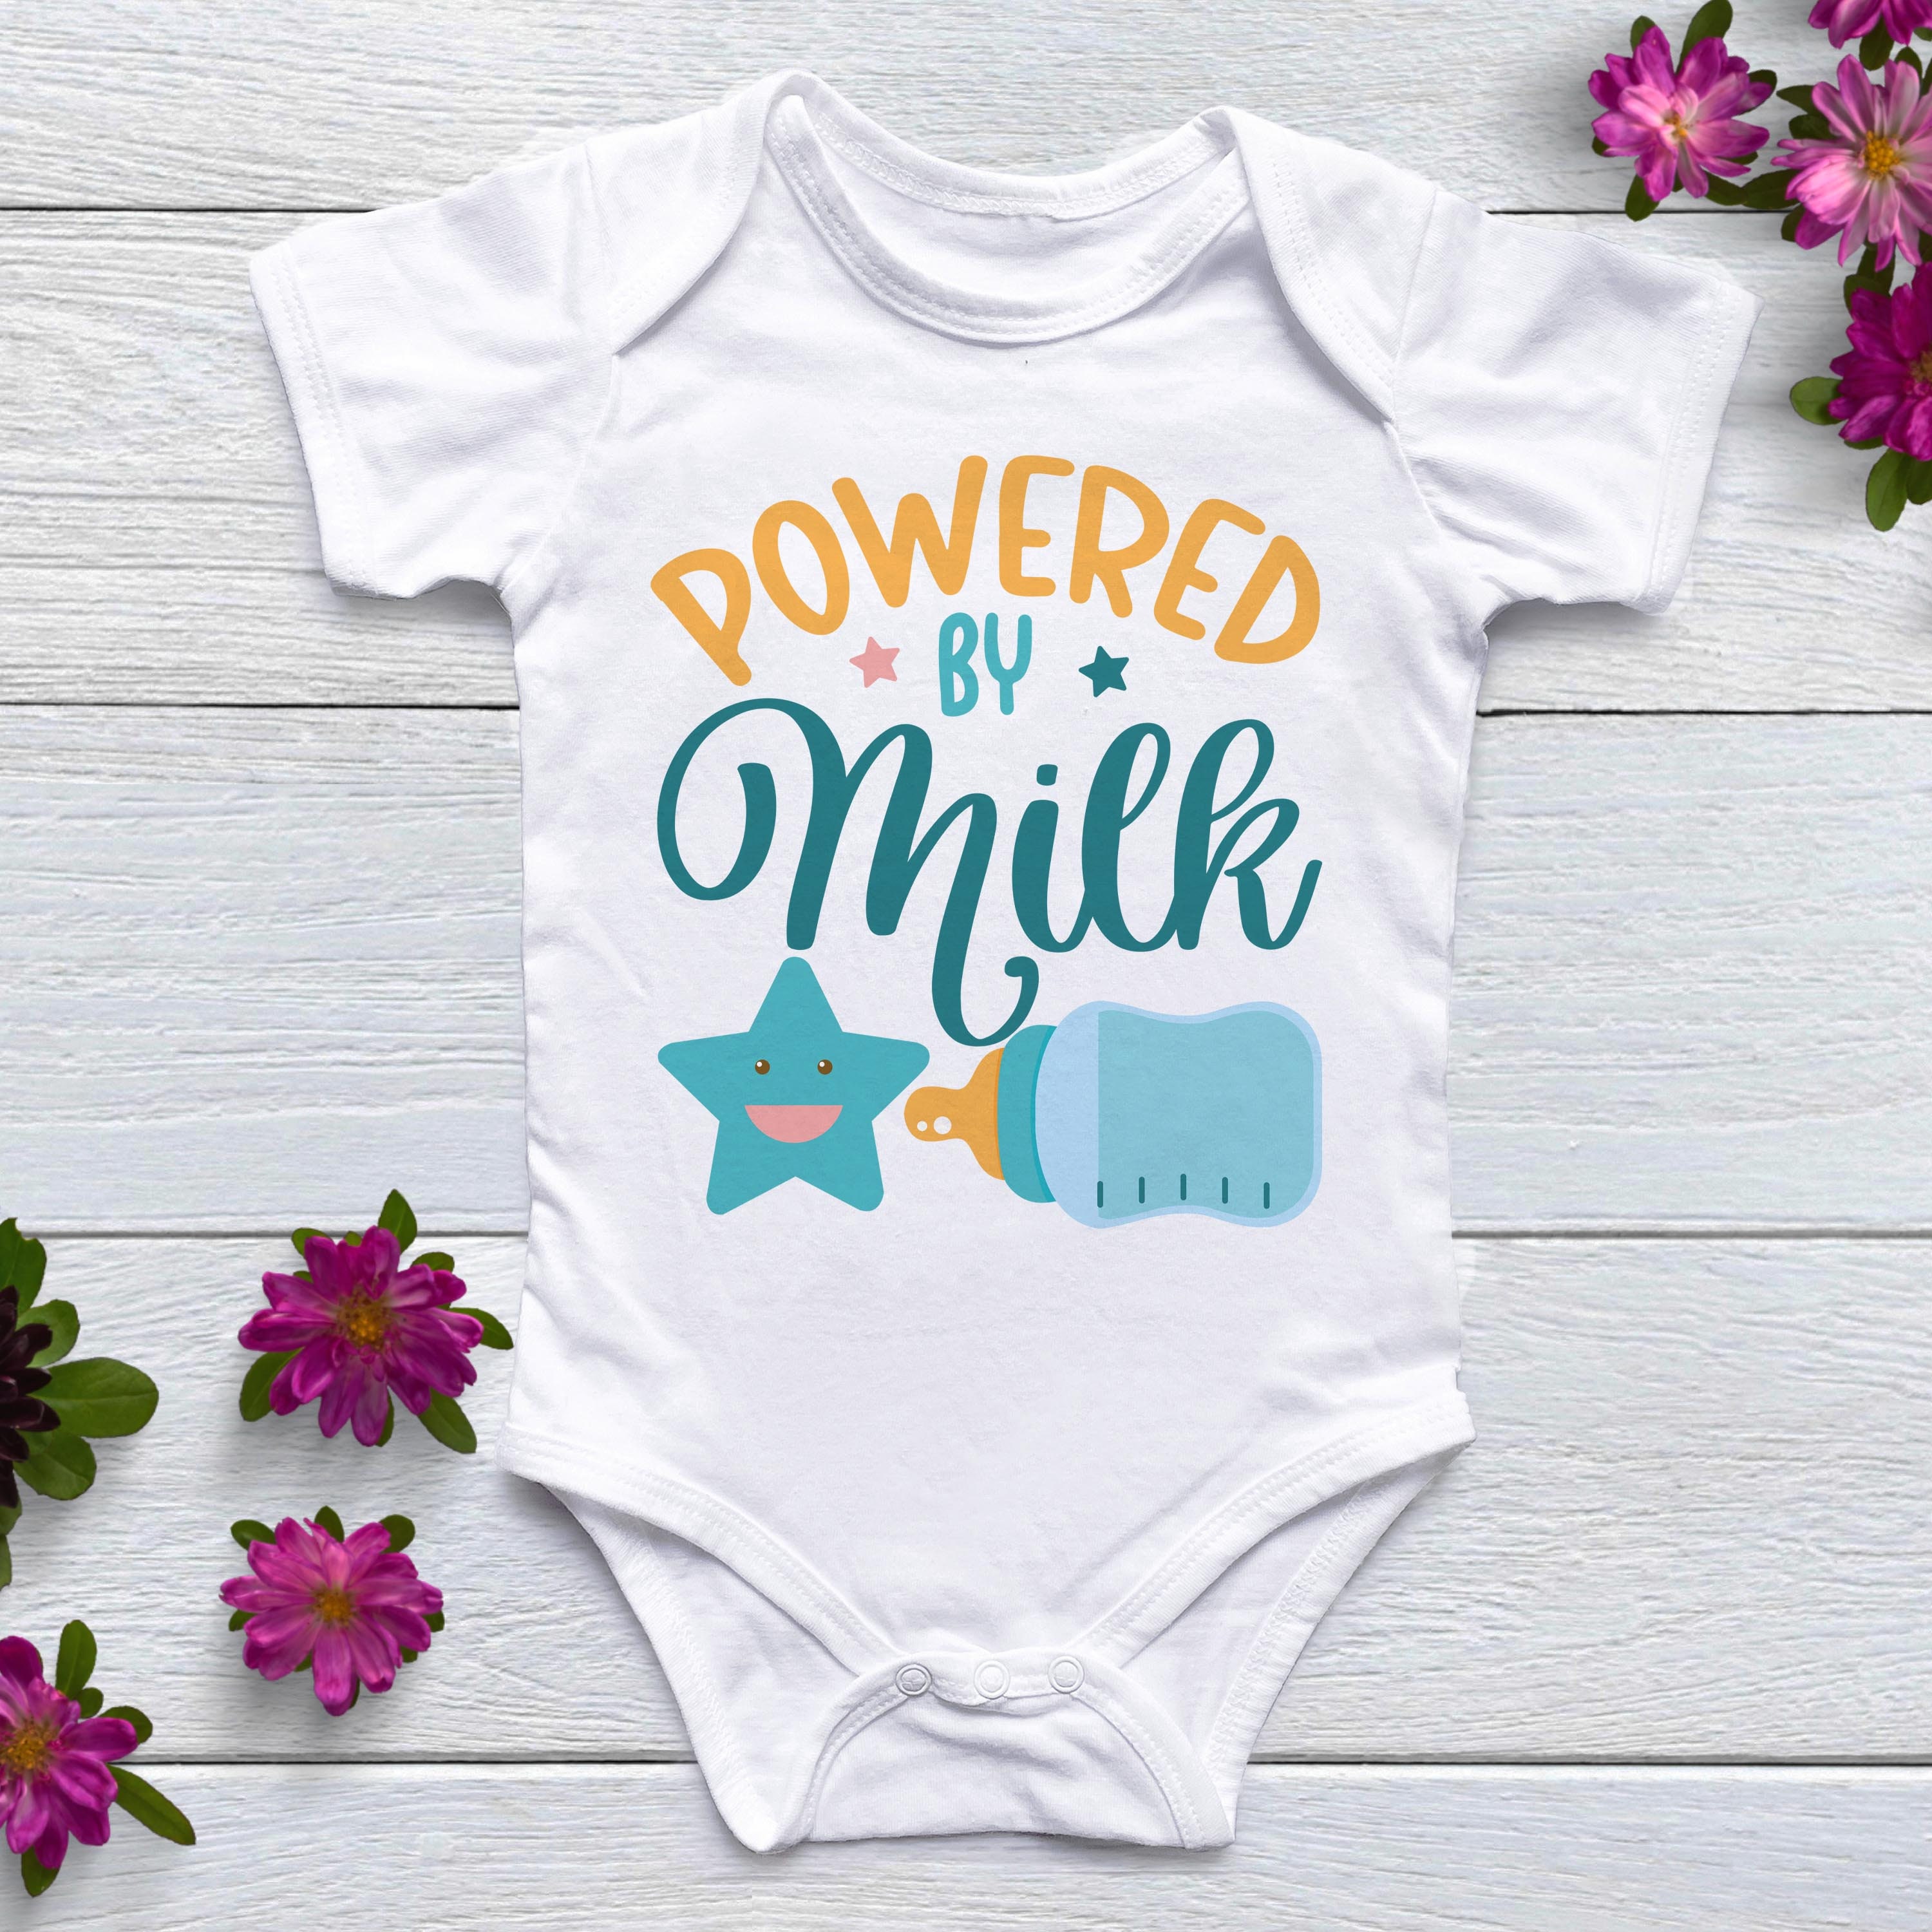 7 Unique Baby Shower Gift Ideas for The New Mommy-Baby Duo